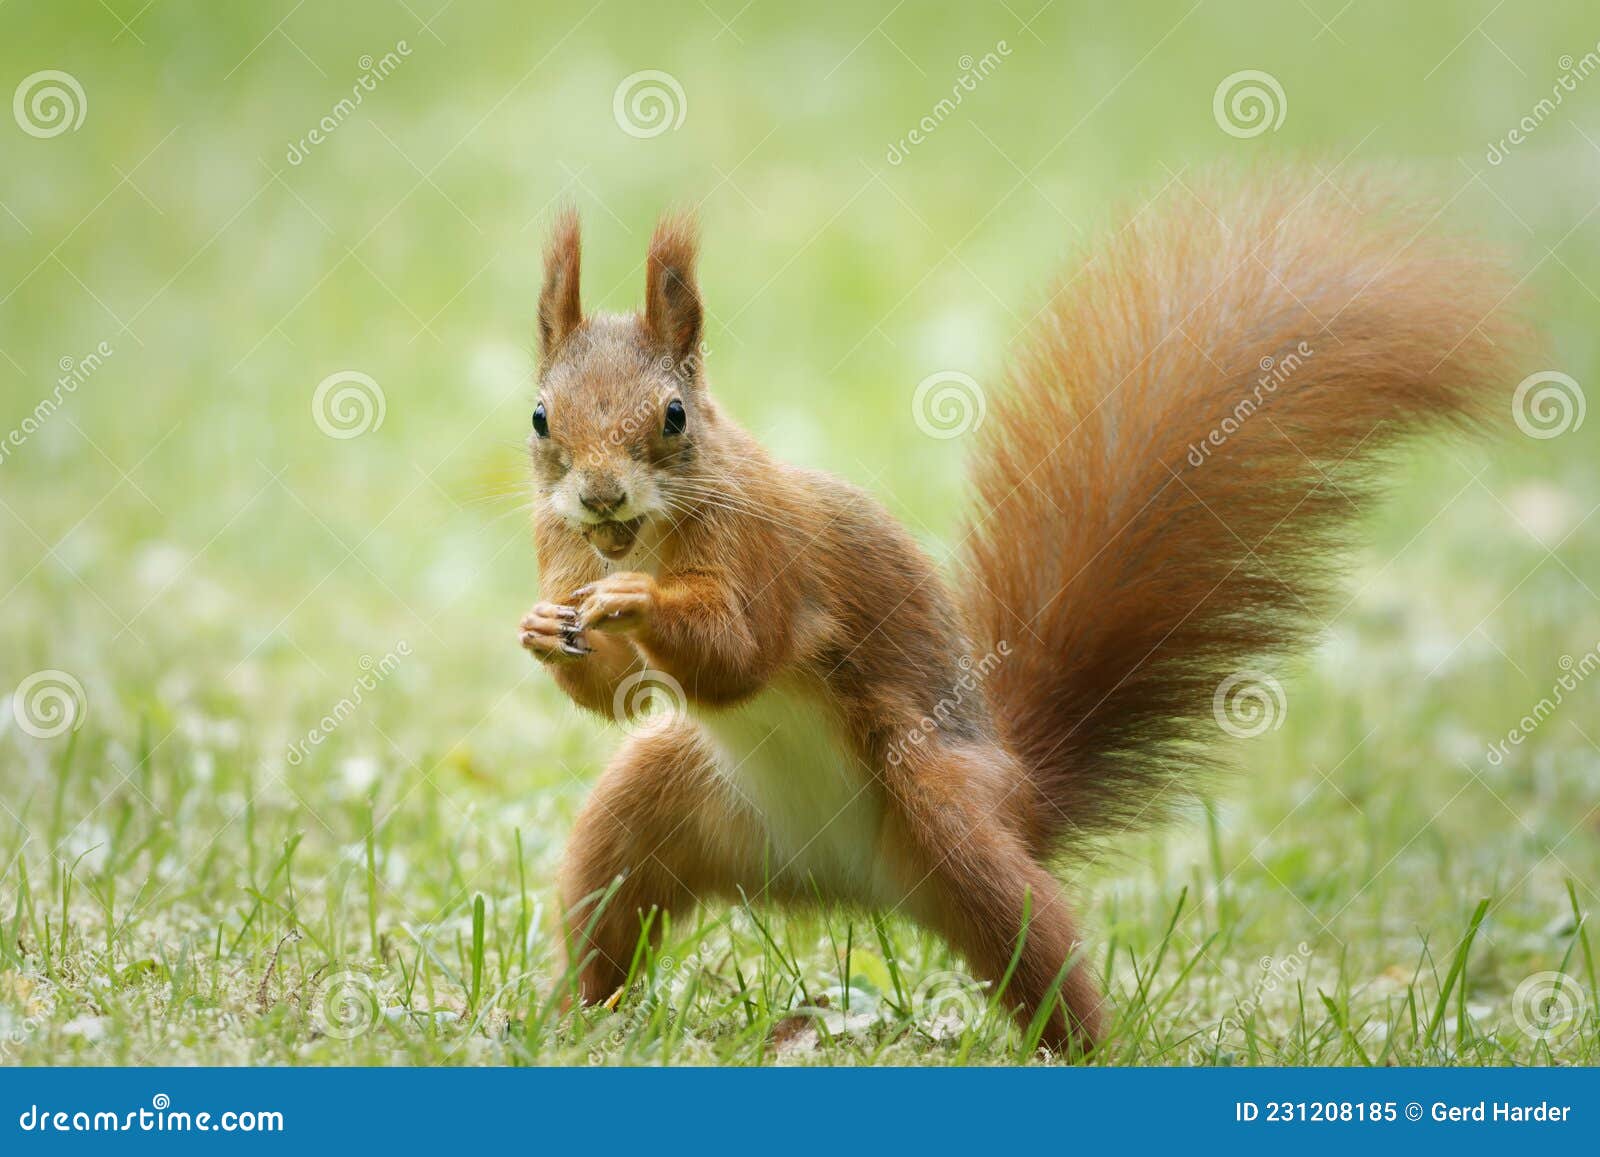 Funny Squirrel with Nut in Mouth Attacks Stock Image - Image of adorable,  looking: 231208185